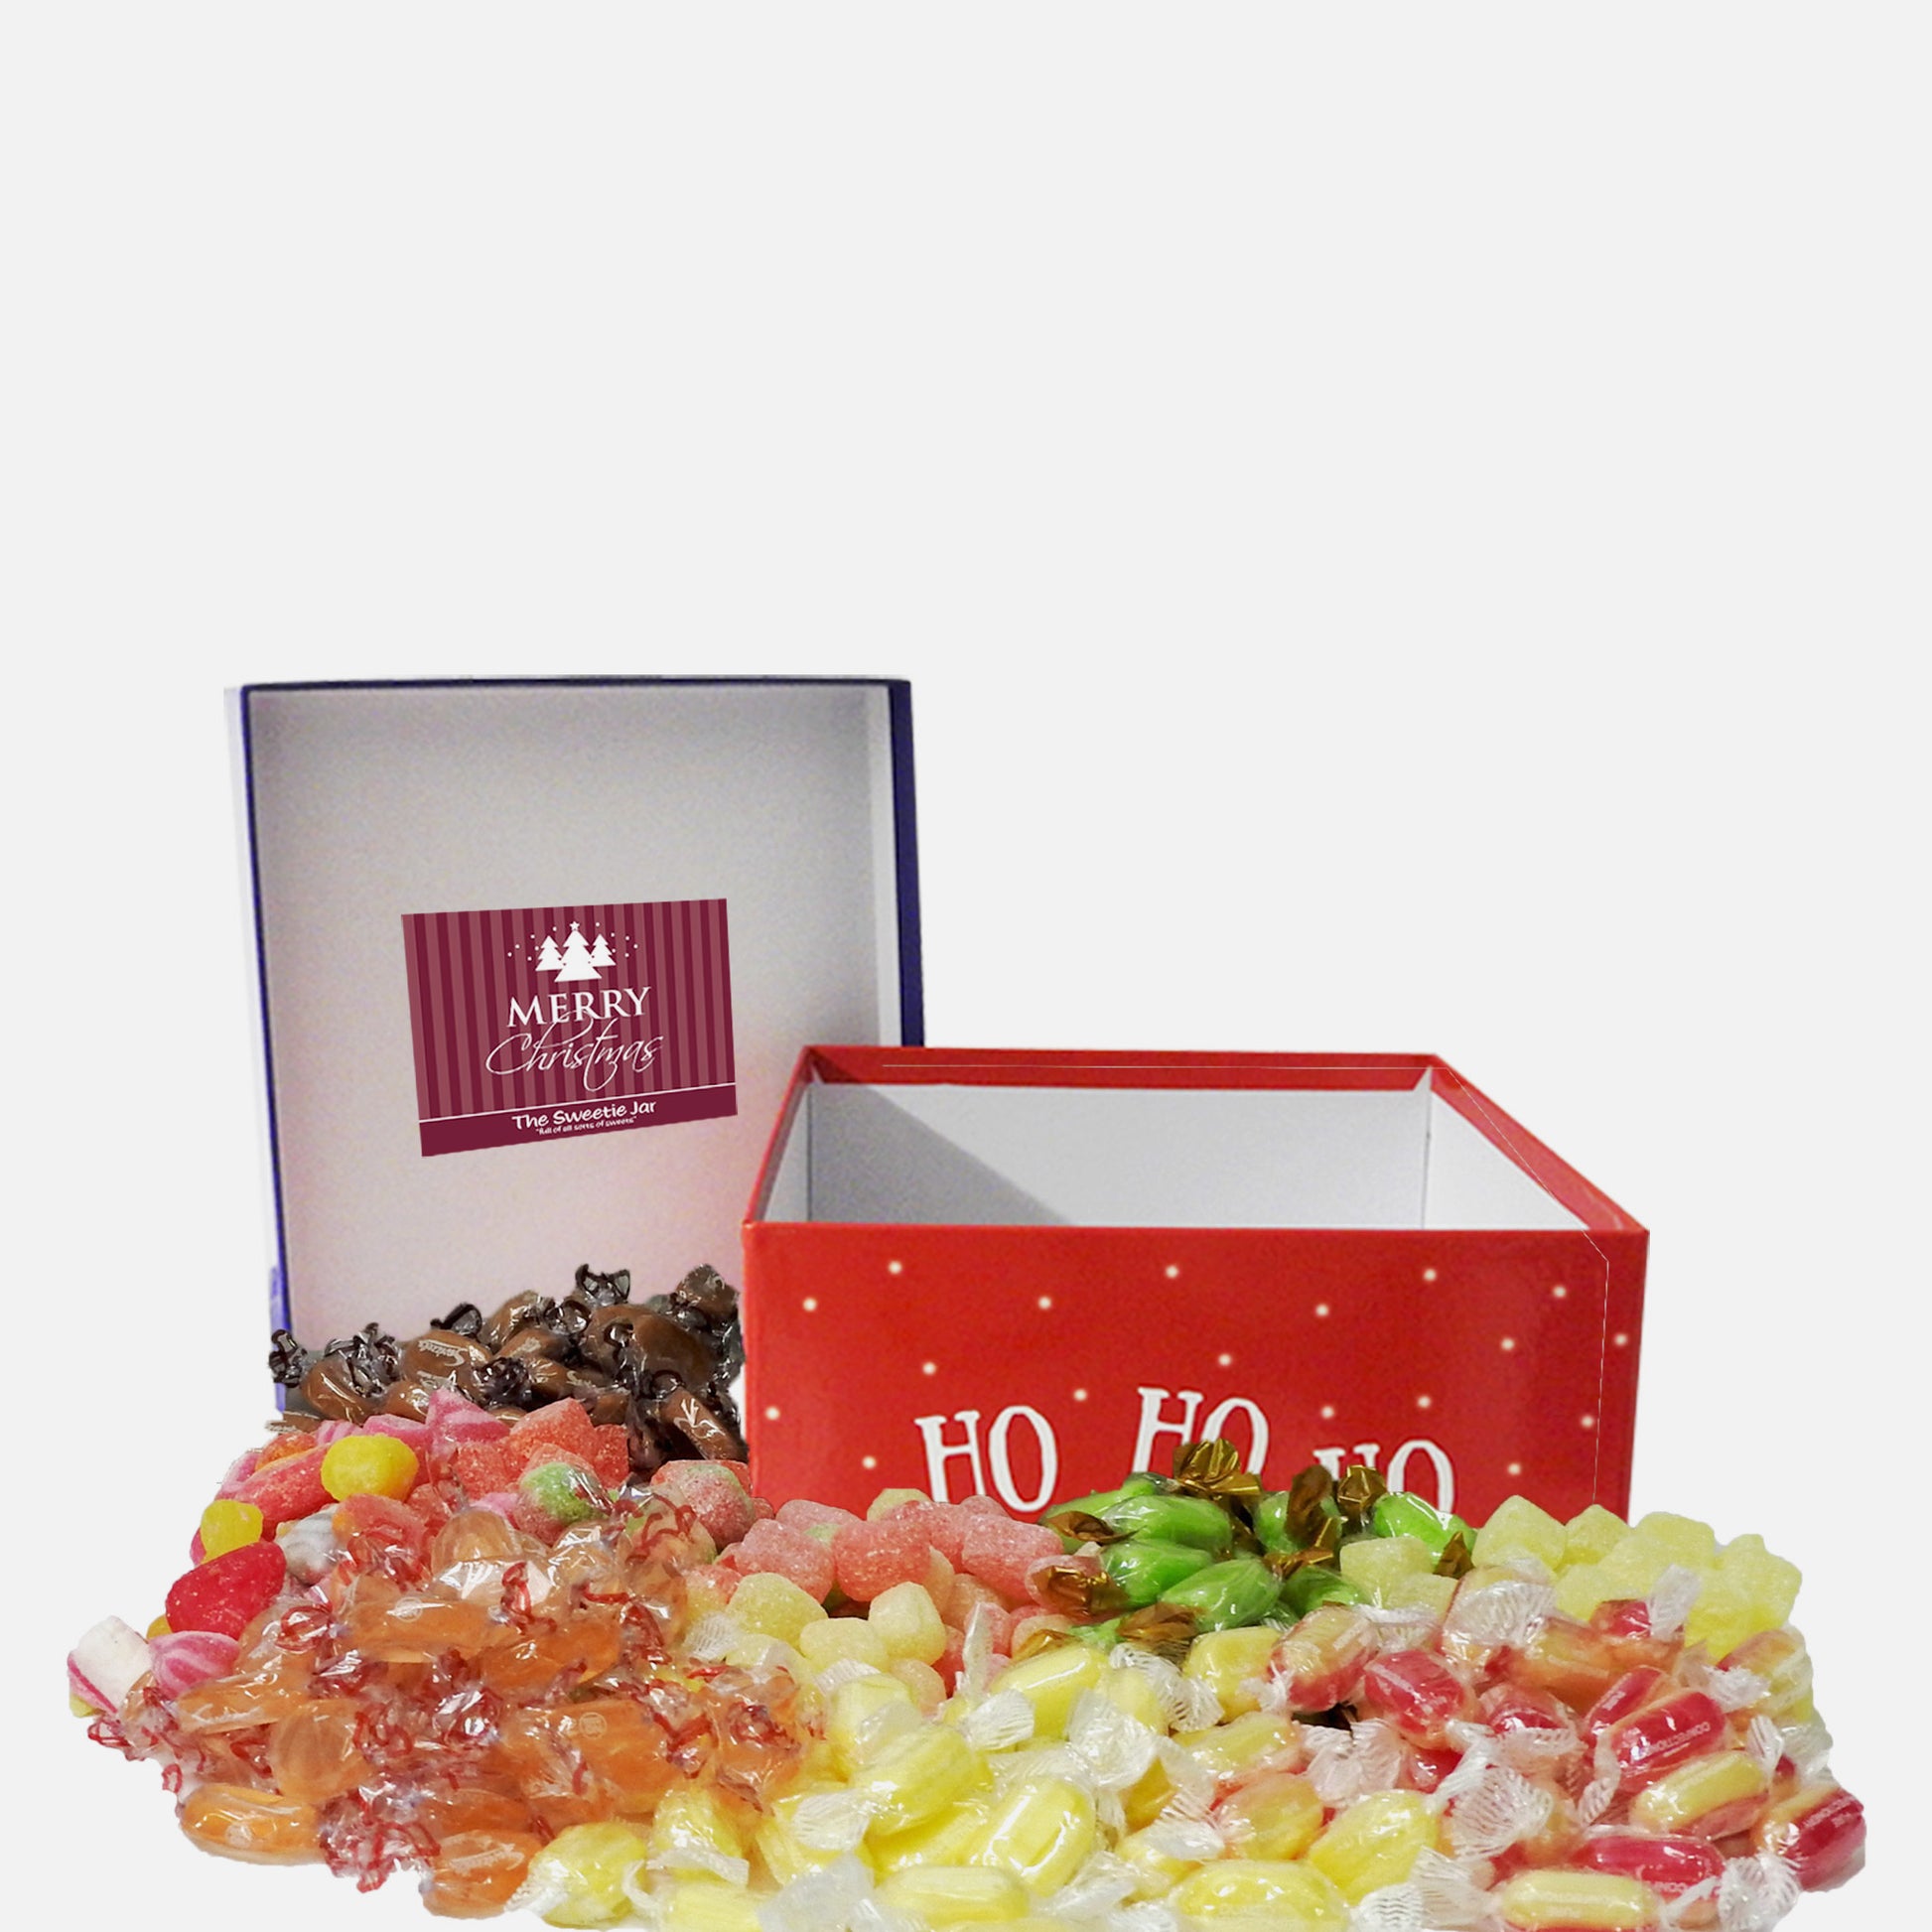 Boiled Sweets Christmas Medium Gift Box - Retro Sweets Gifts at The Sweetie Jar